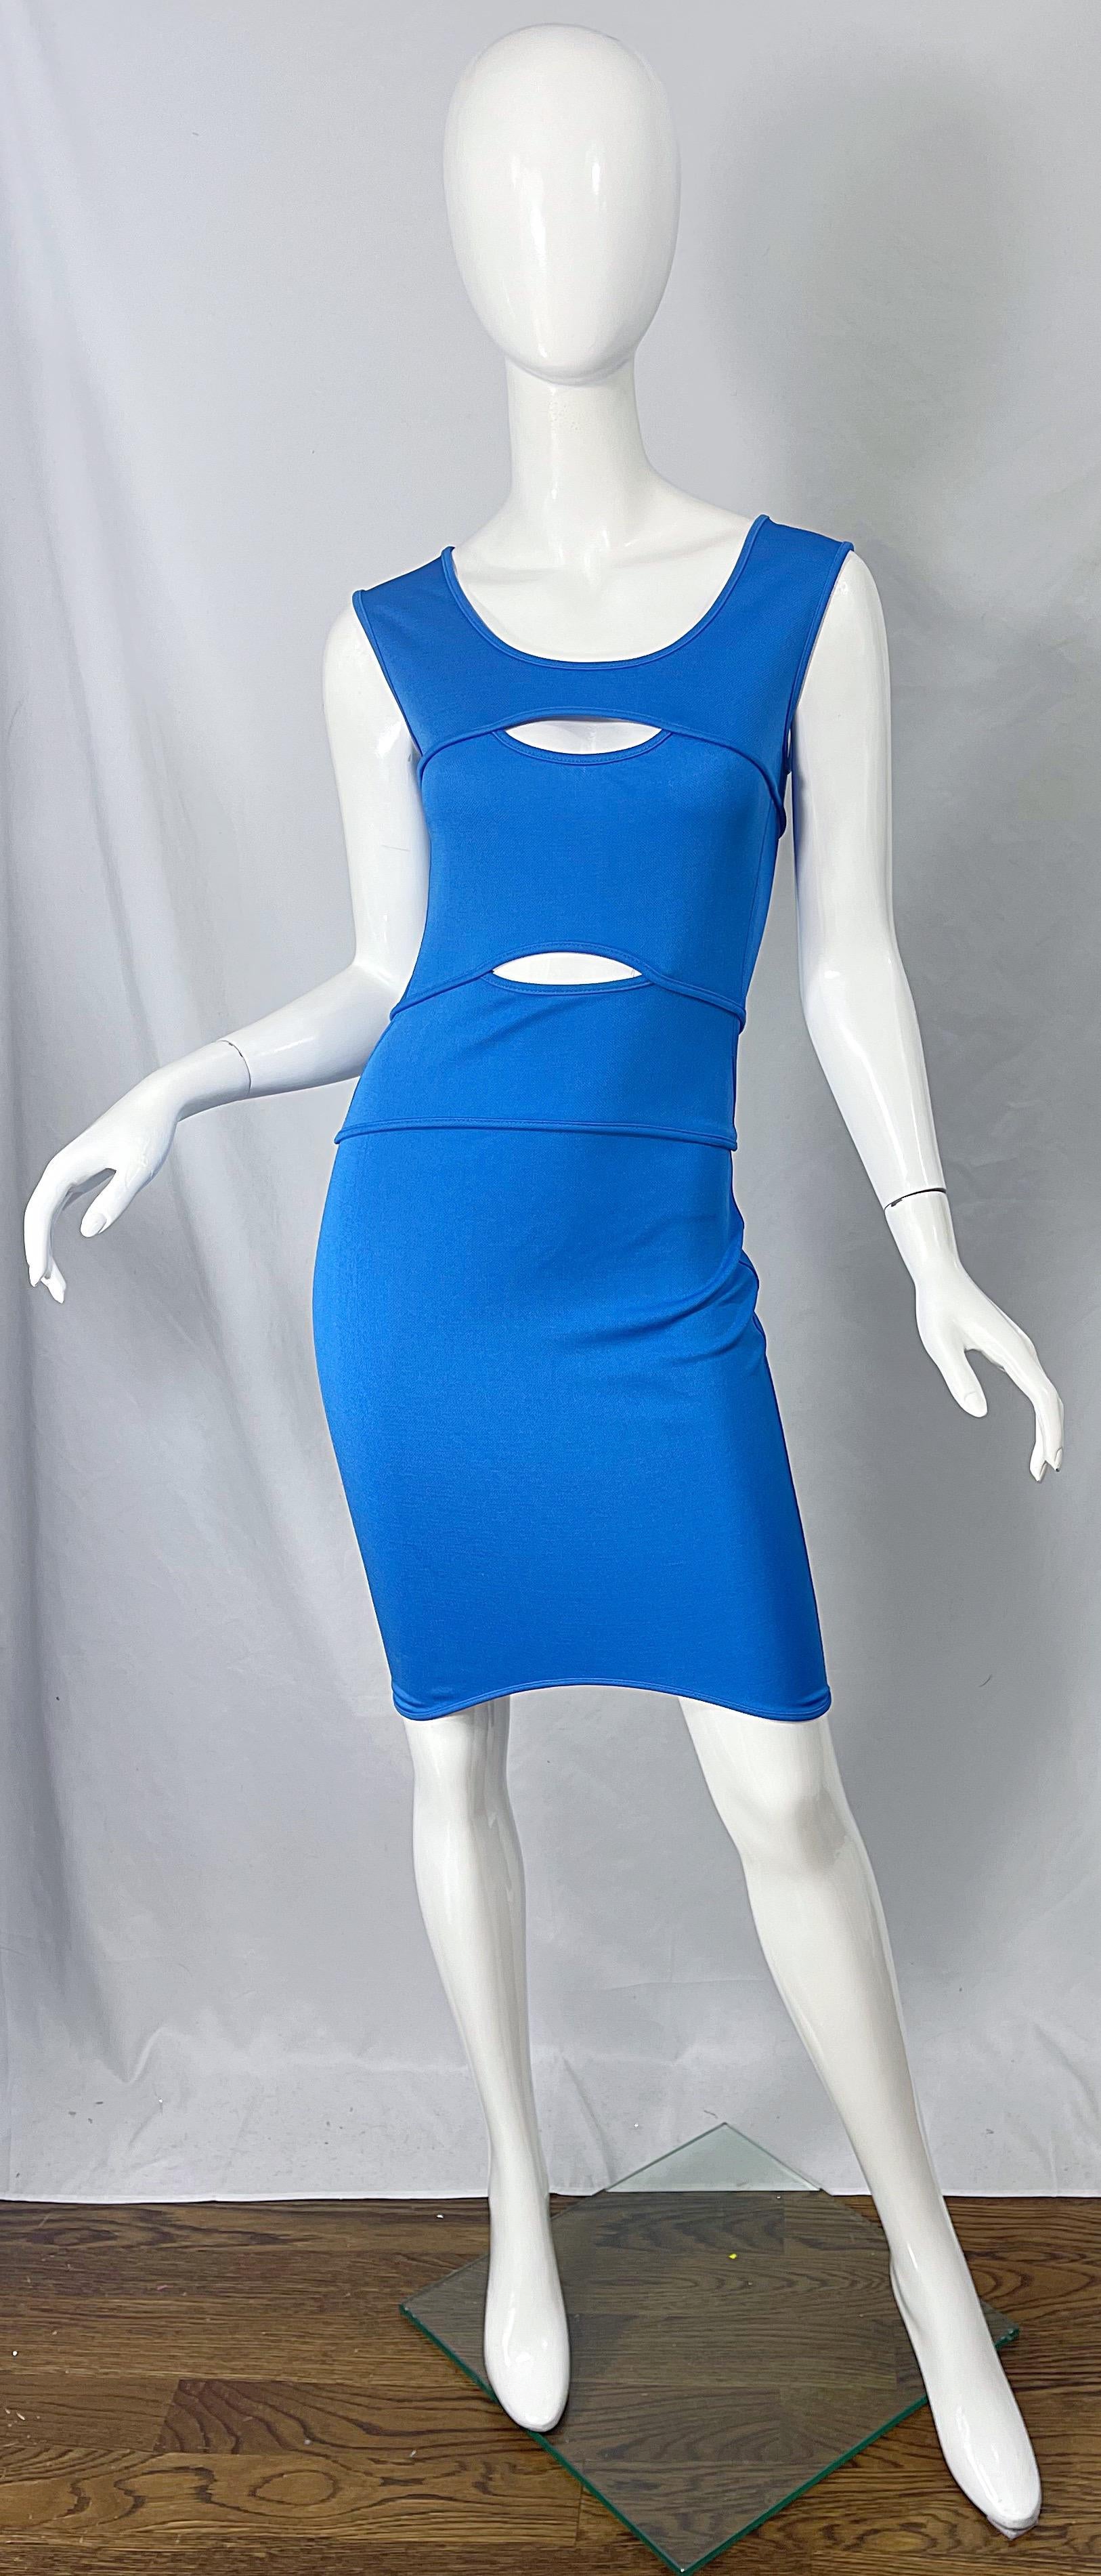 Thierry Mugler 1990s Blue Cut Out Vintage Body Con 90s Dress Size 44 / 6 - 8 For Sale 7